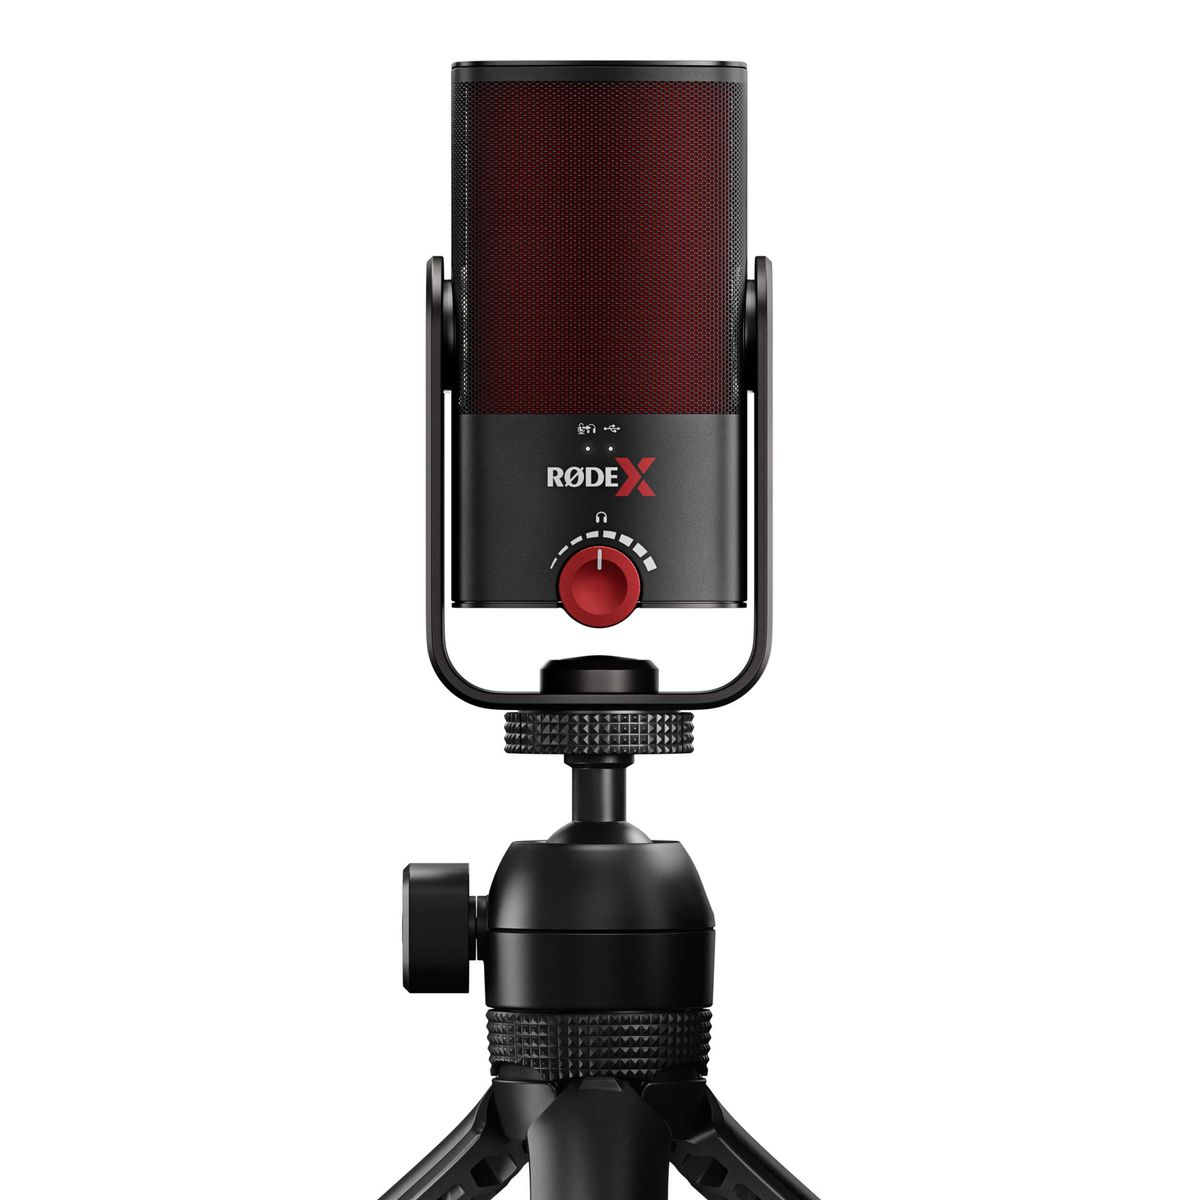 RODE X XCM-50 Compact USB-C Condenser microphone | Buy Online in South ...